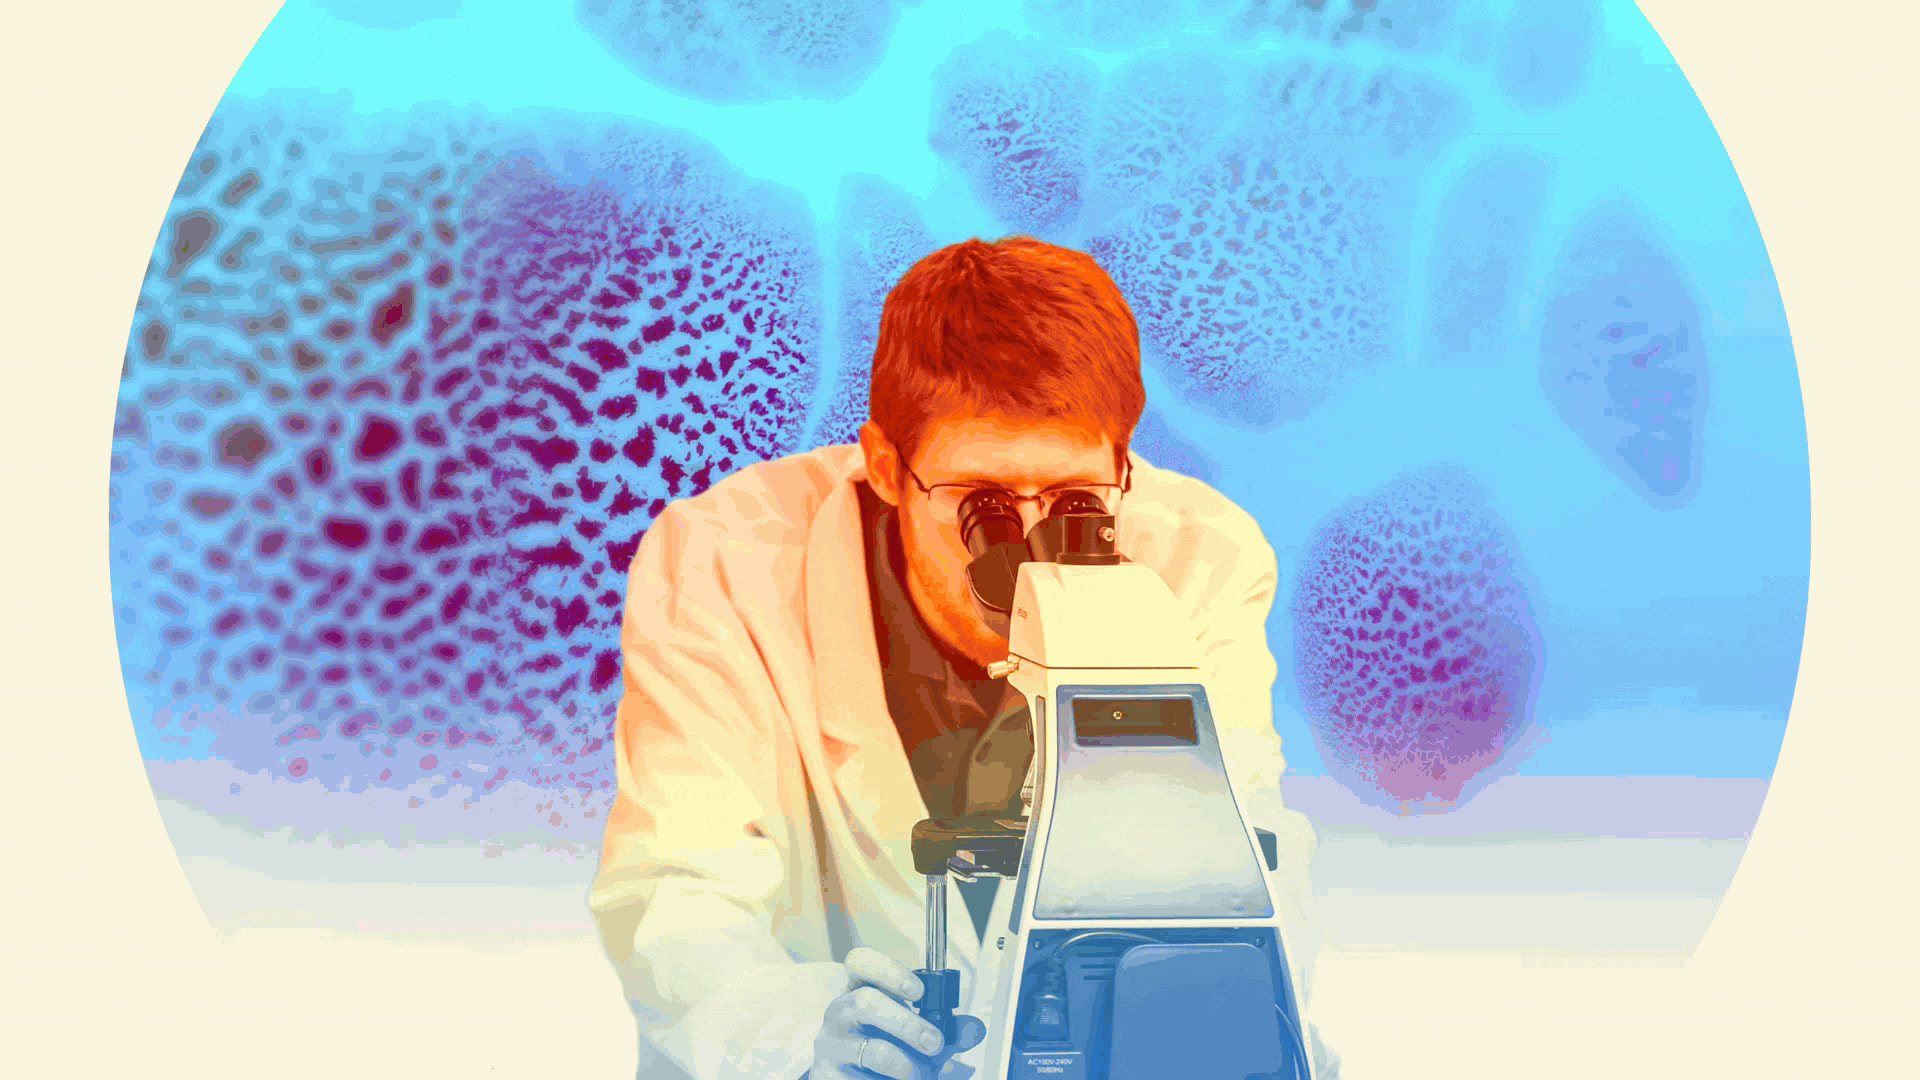 Jason Wallach looking into microscope with organisms behind him